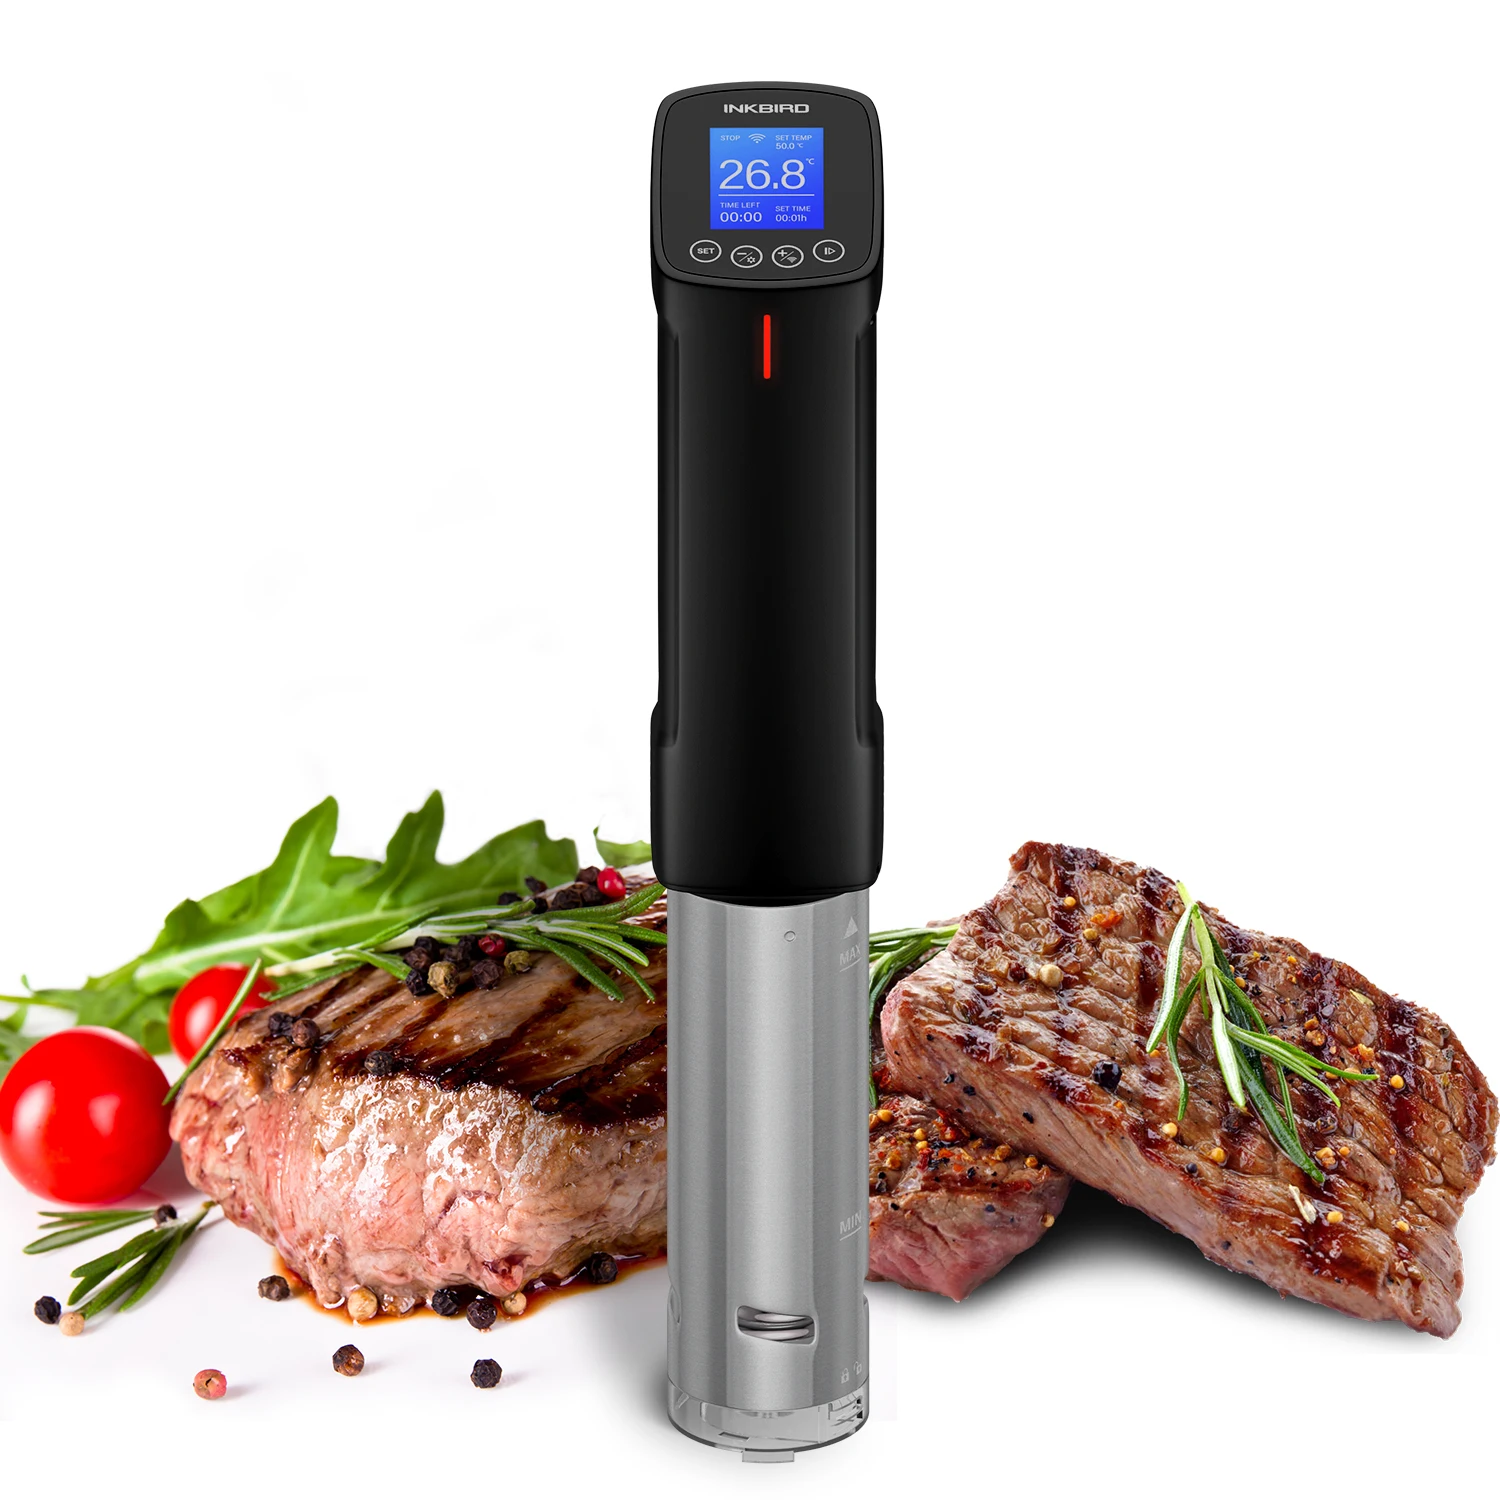 

Inkbird Sous Vide WI-FI Culinary Cooker 1000W Accurate Cooking with LCD Display Stainless Steel Thermal Immersion Circulator